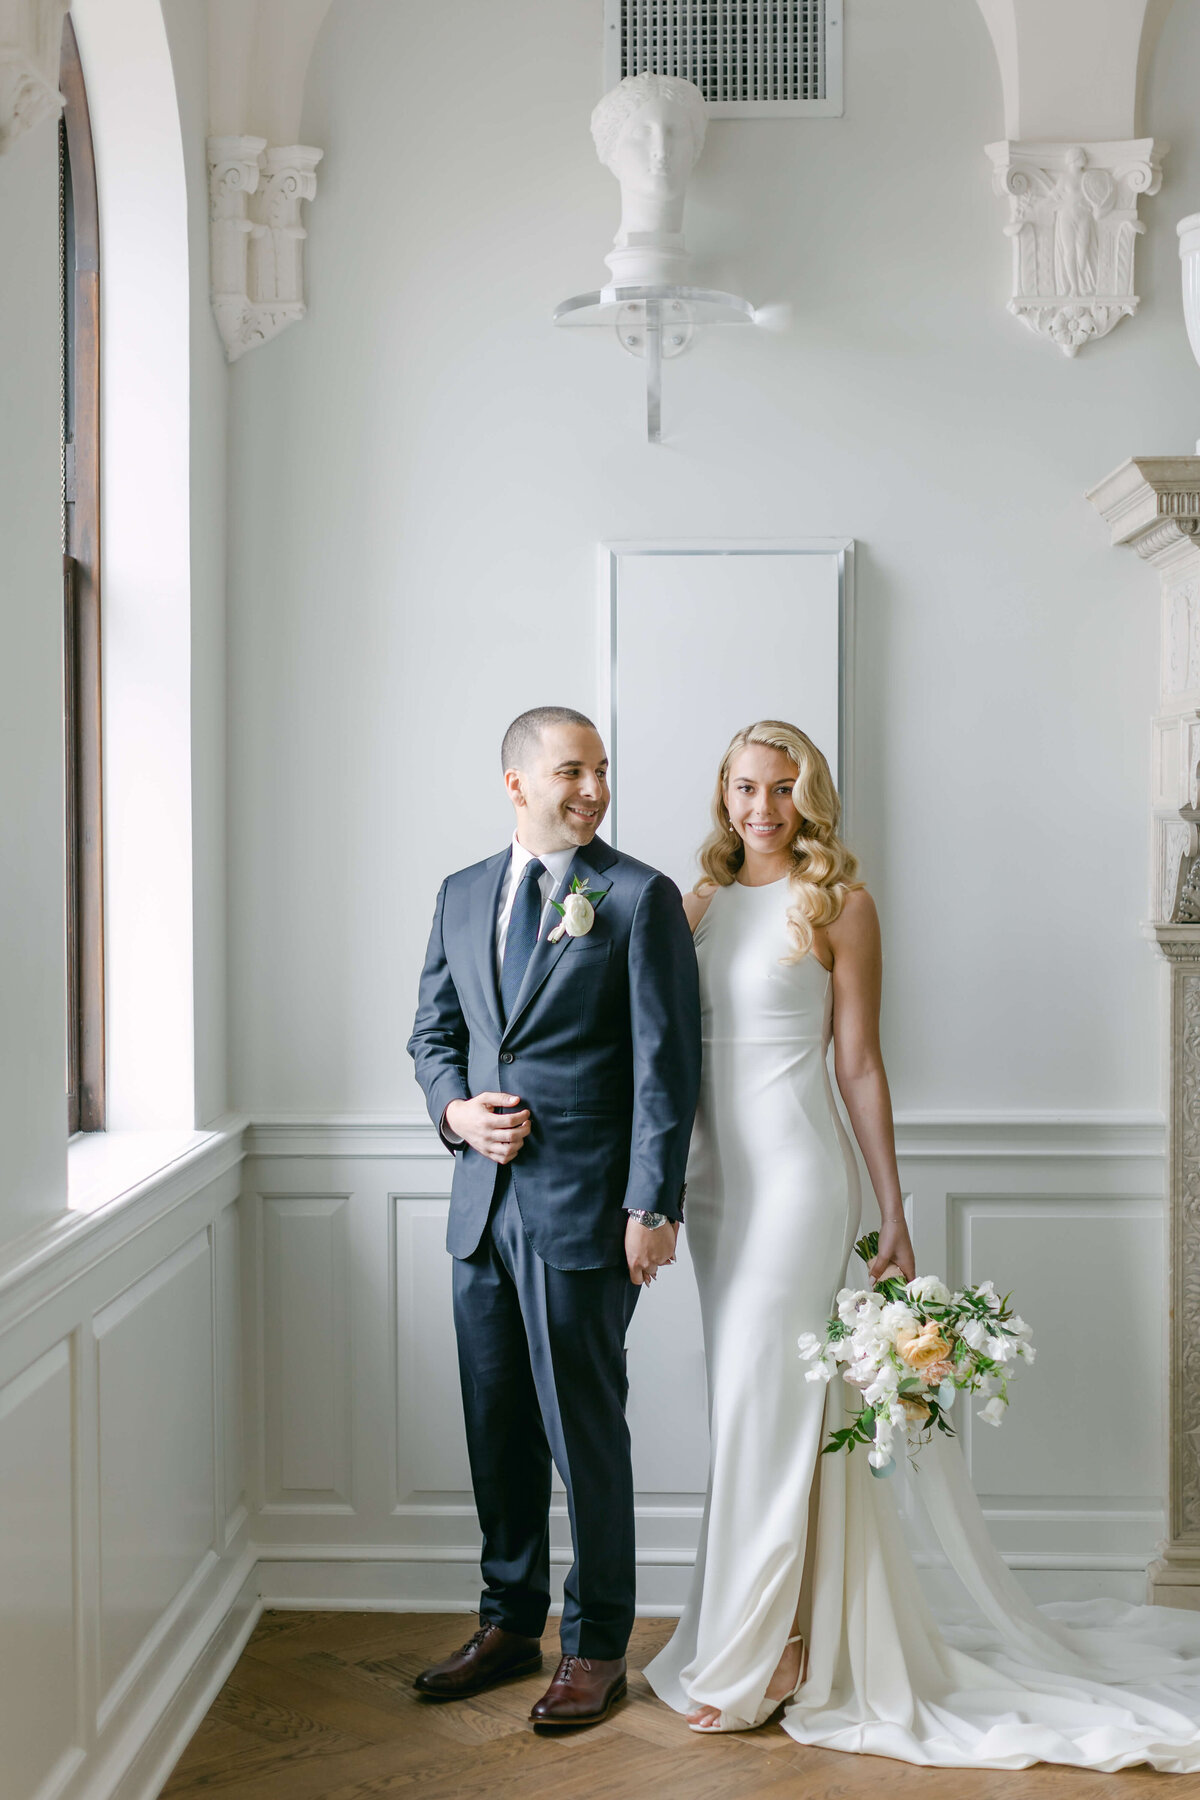 A bride and groom stand in a hallway.